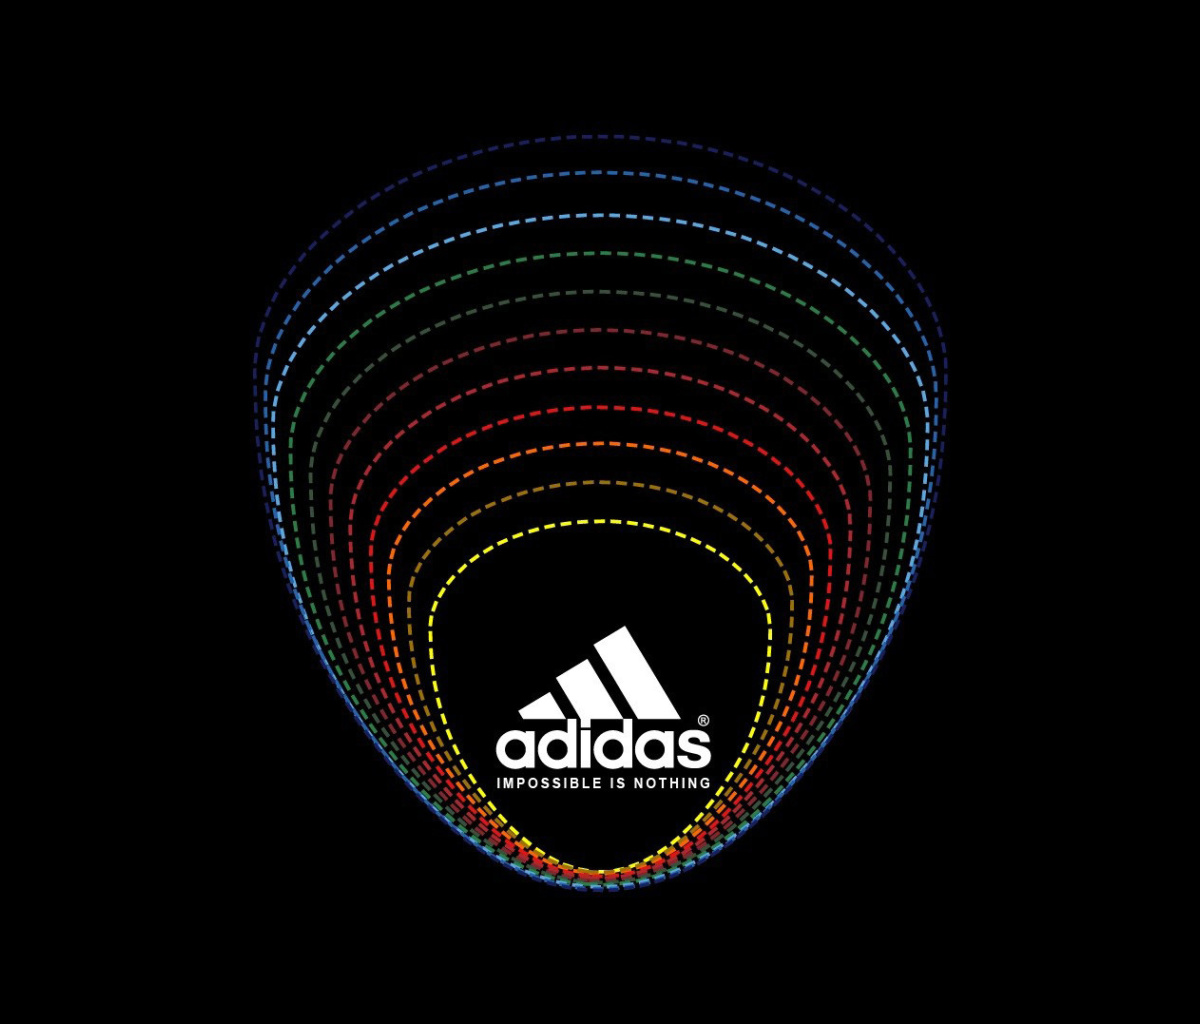 Adidas Tagline, Impossible is Nothing screenshot #1 1200x1024